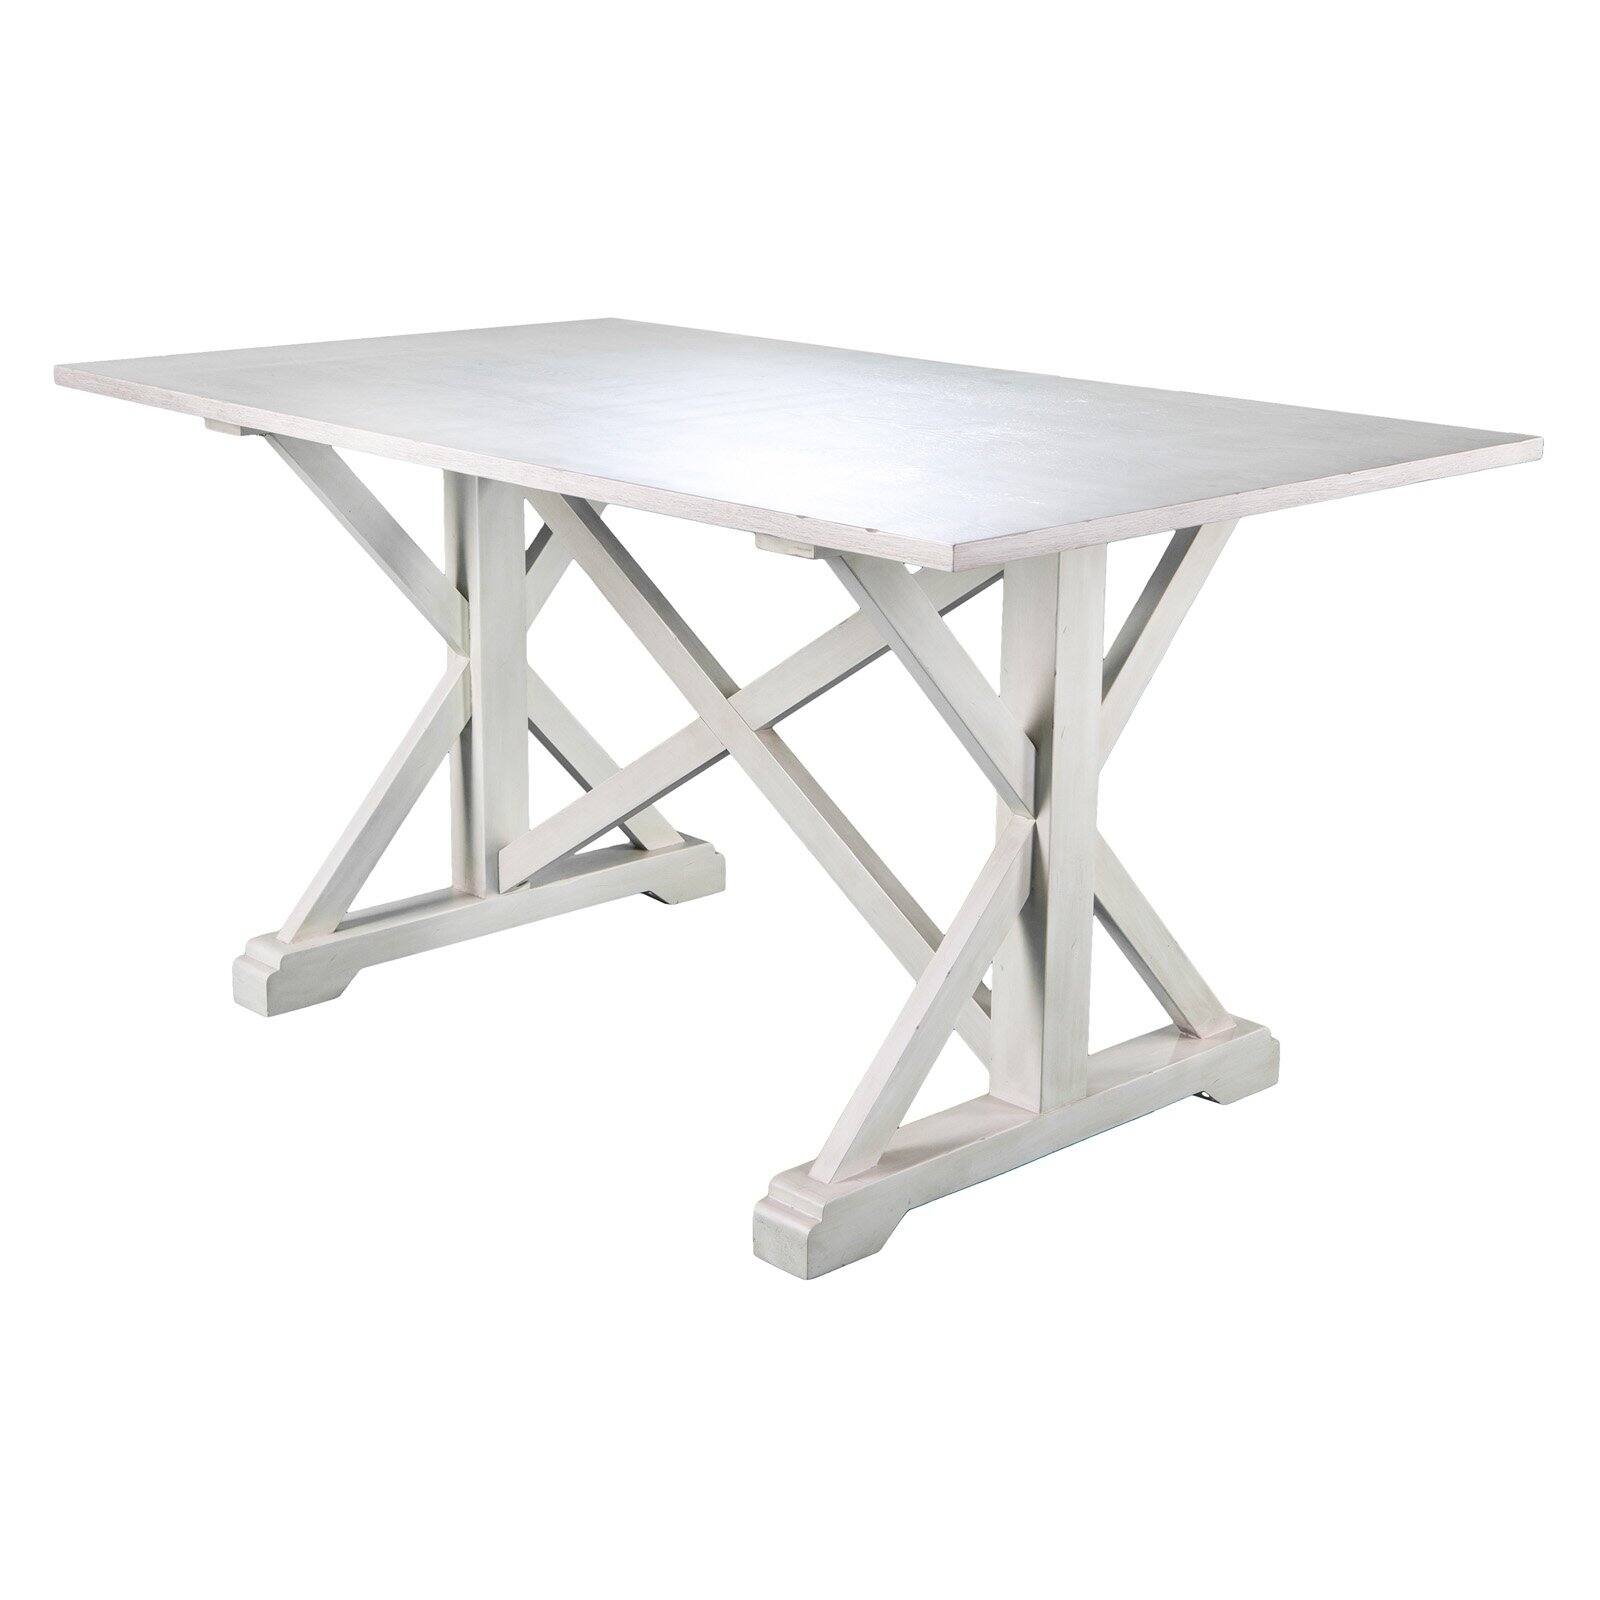 SEI Furniture Cardwell Farmhouse Dining Table in White - image 3 of 8